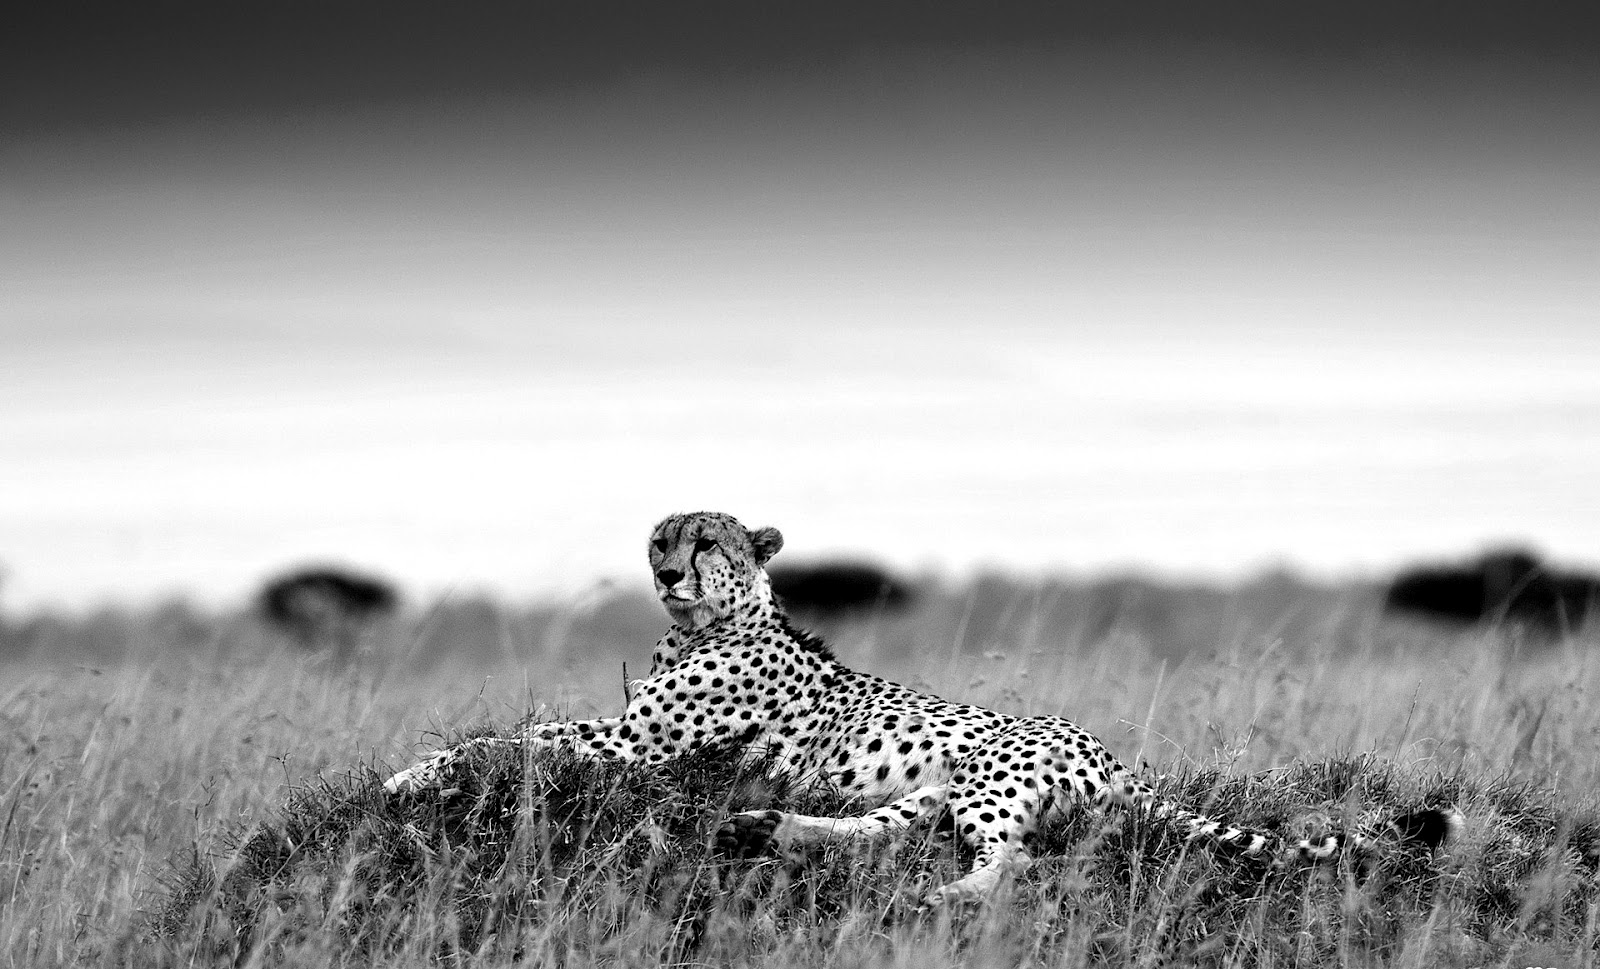 Black And White Leopard Wallpaper Hd Images amp Pictures   Becuo